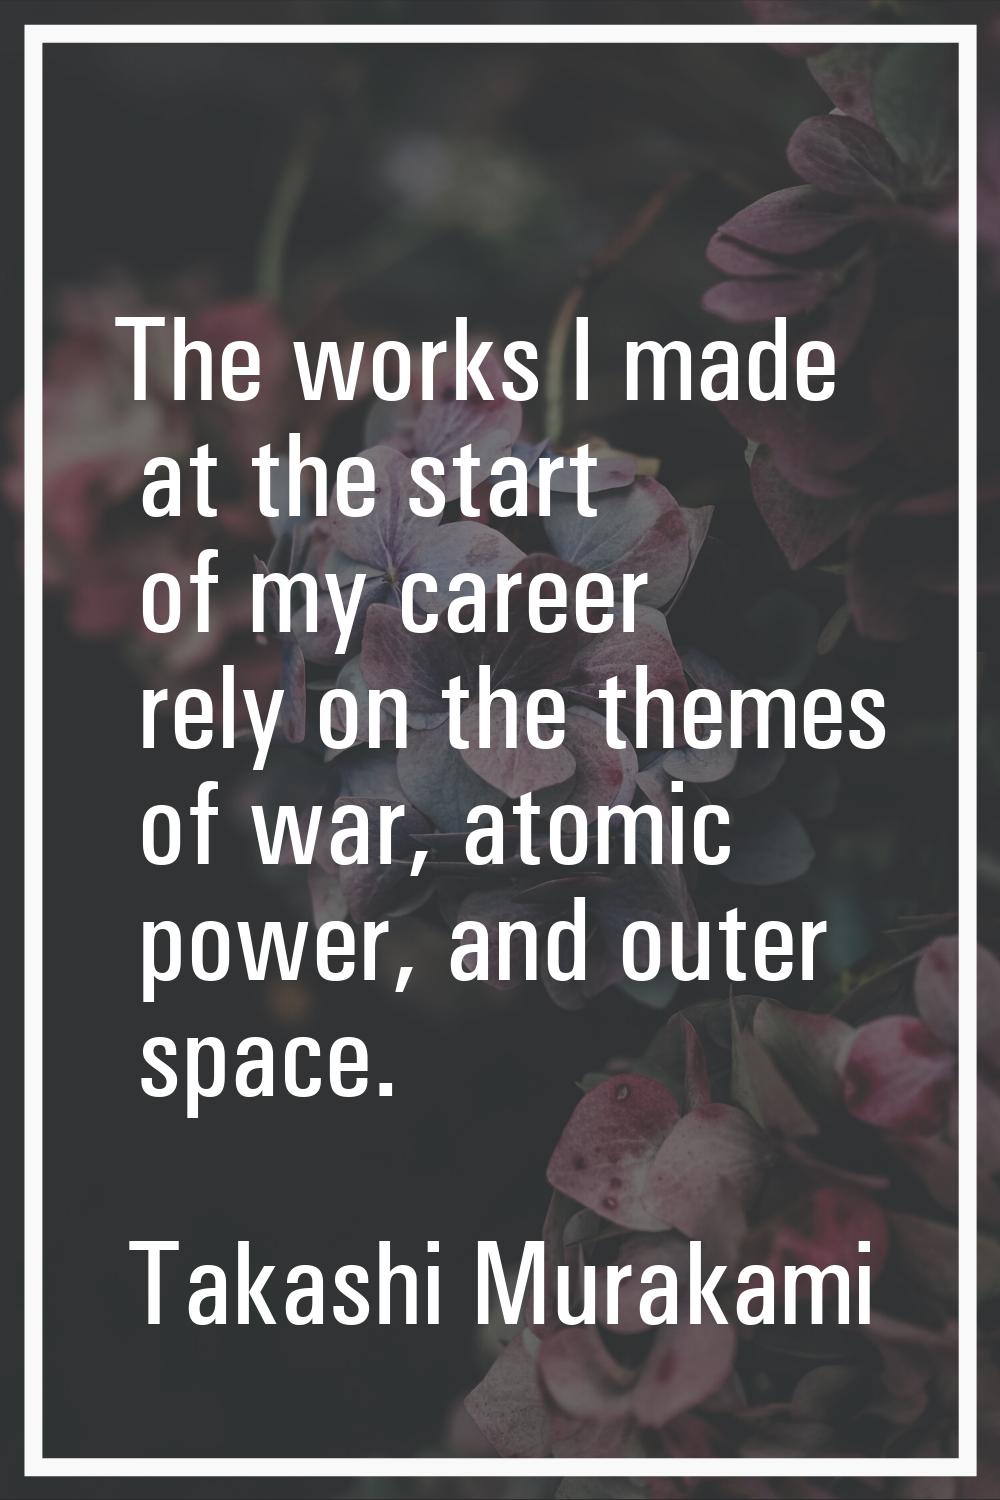 The works I made at the start of my career rely on the themes of war, atomic power, and outer space